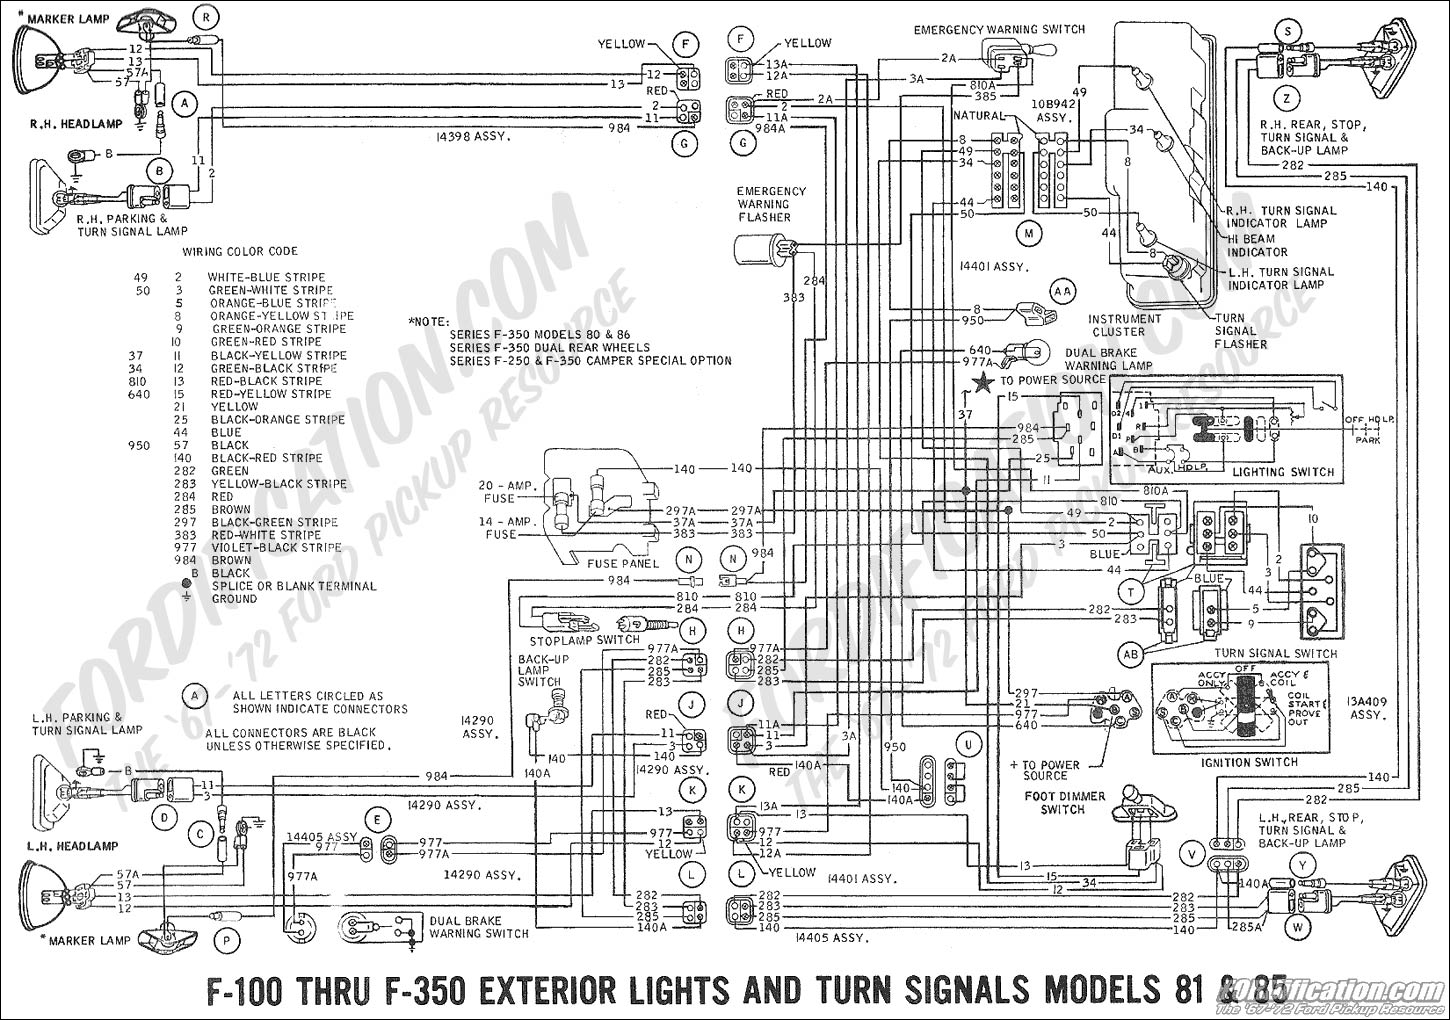 2001 Ford Ranger Wiring Diagram Pdf from www.fordification.com